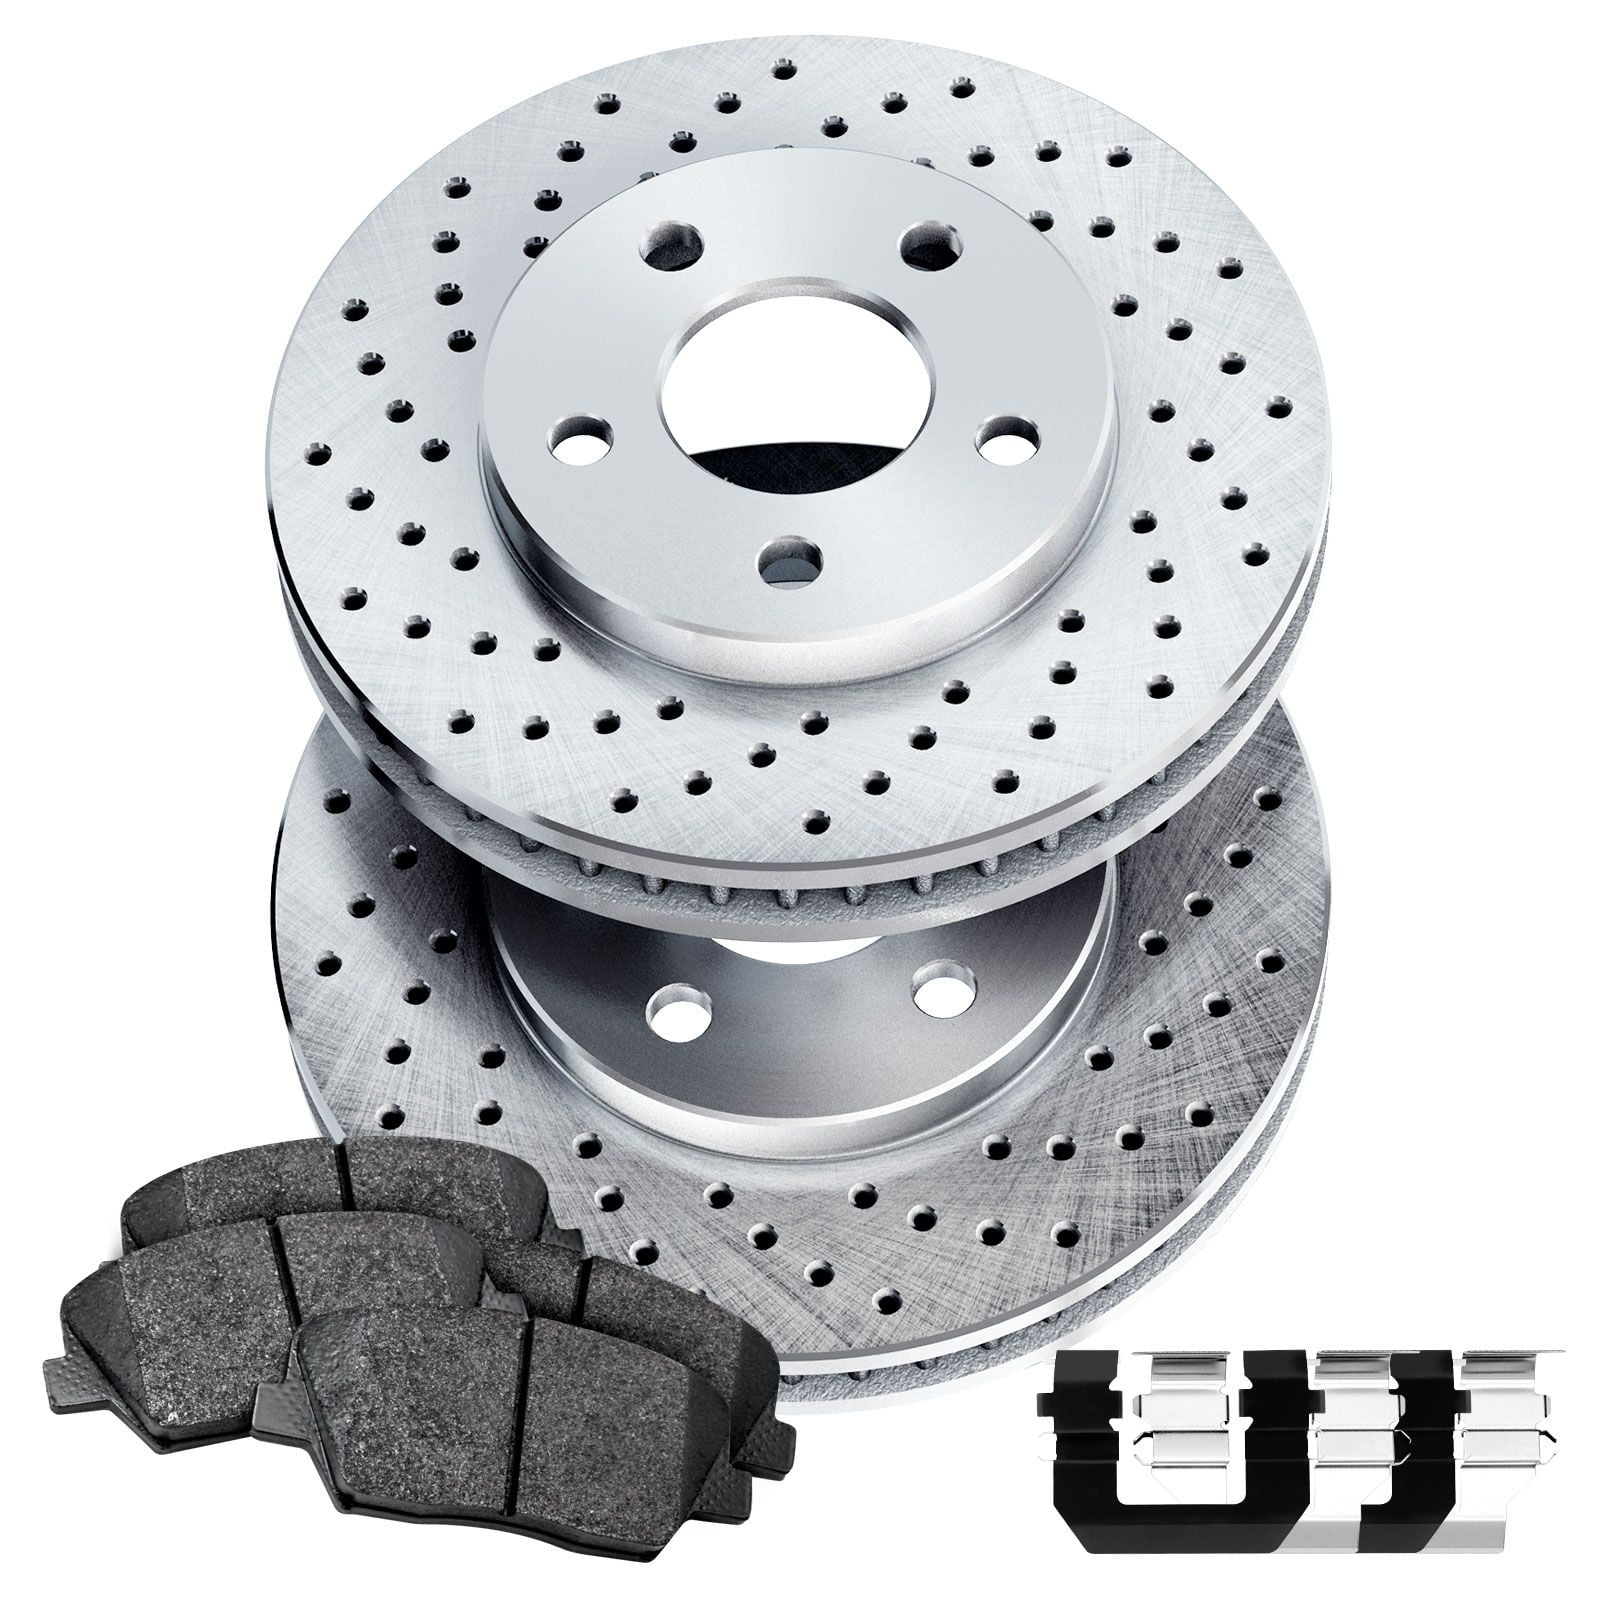 Audi A6 Allroad Drilled Grooved Brake Discs Front Rear 